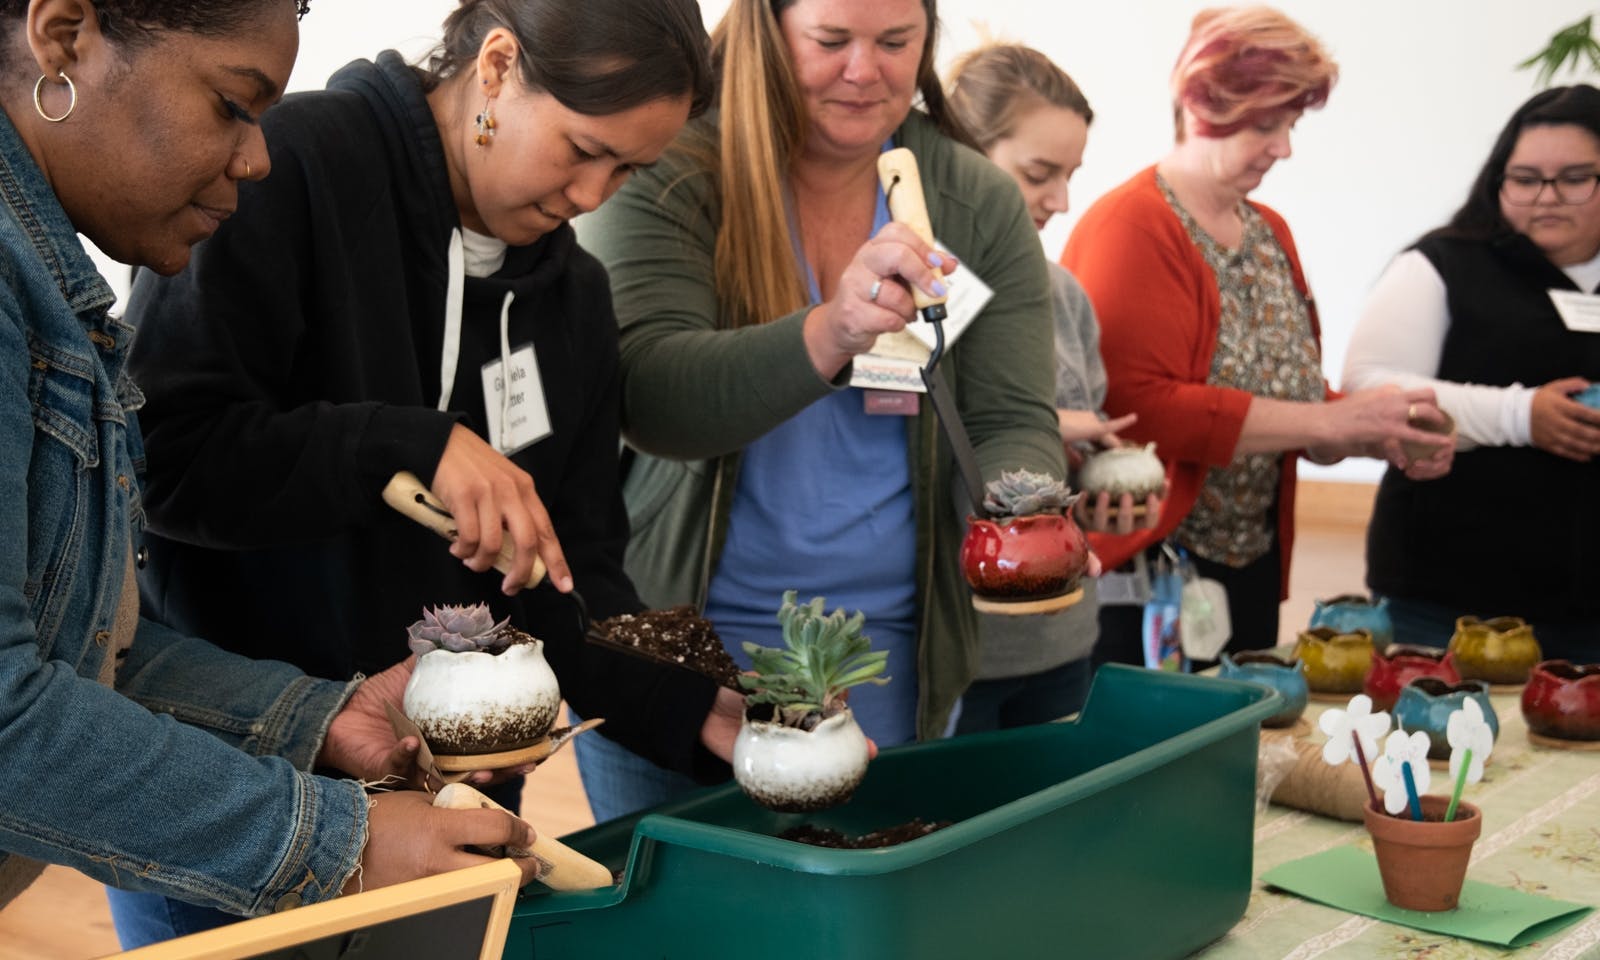 Six women planting succulents in small pots.